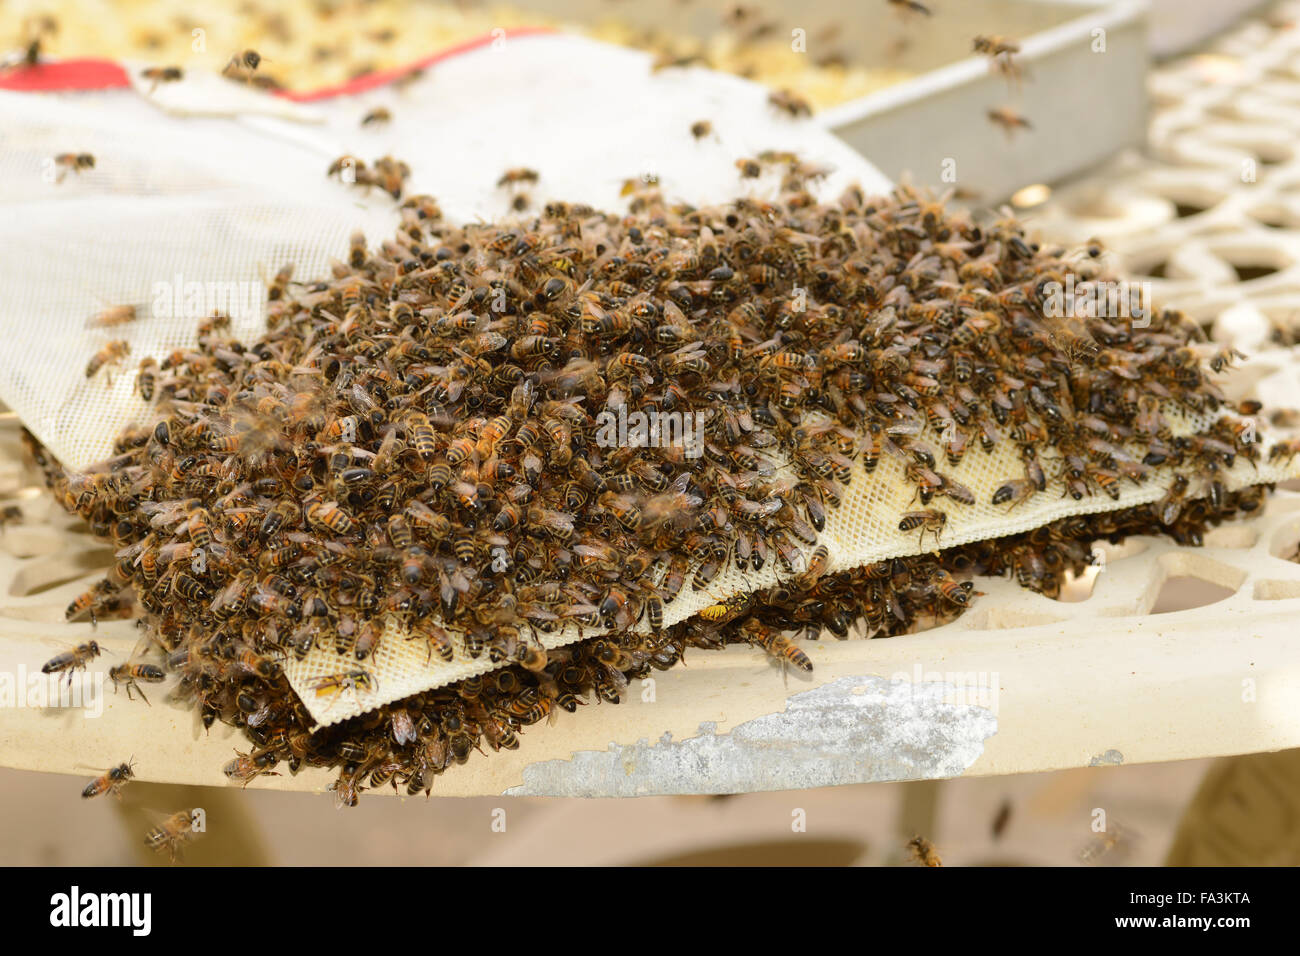 Honey bees cleaning up the beeswax bag that sits inside the honey extractor Stock Photo